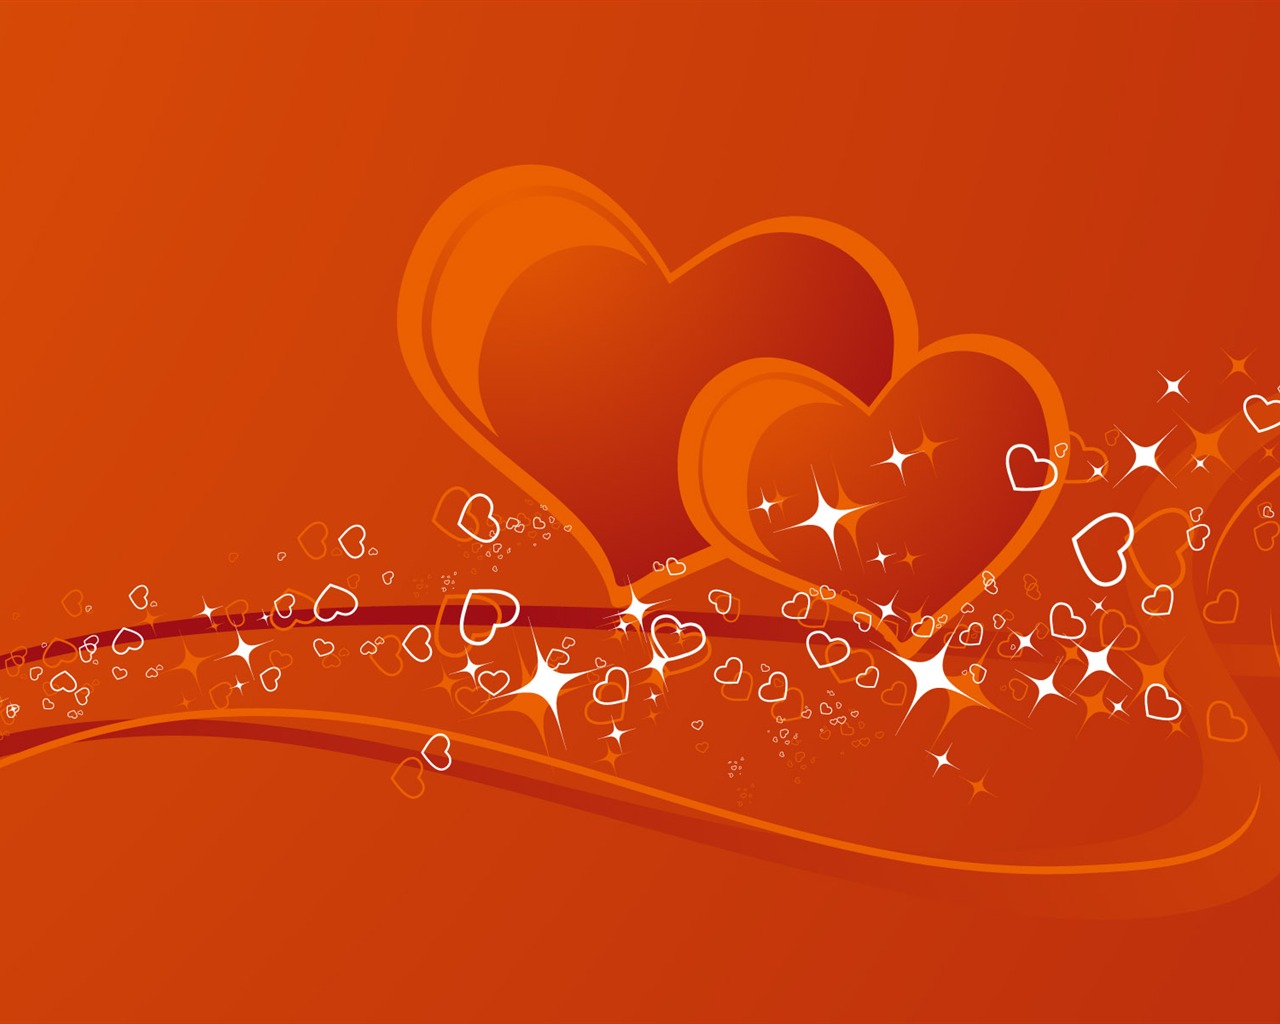 Valentine's Day Love Theme Wallpapers #25 - 1280x1024